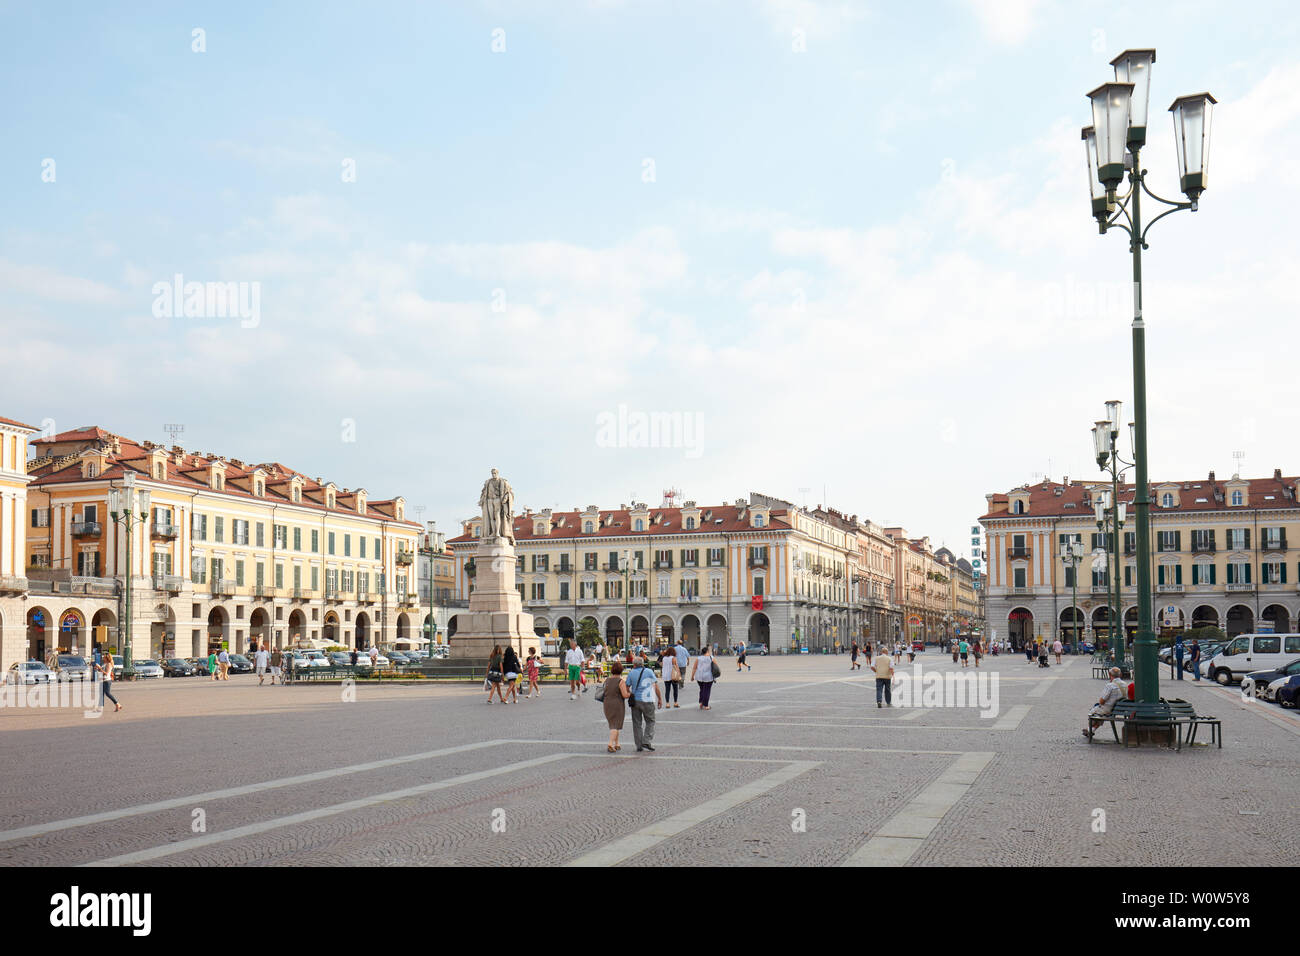 CUNEO, ITALY - AUGUST 13, 2015: Galimberti square with people in a summer evening, blue sky in Cuneo, Italy. Stock Photo